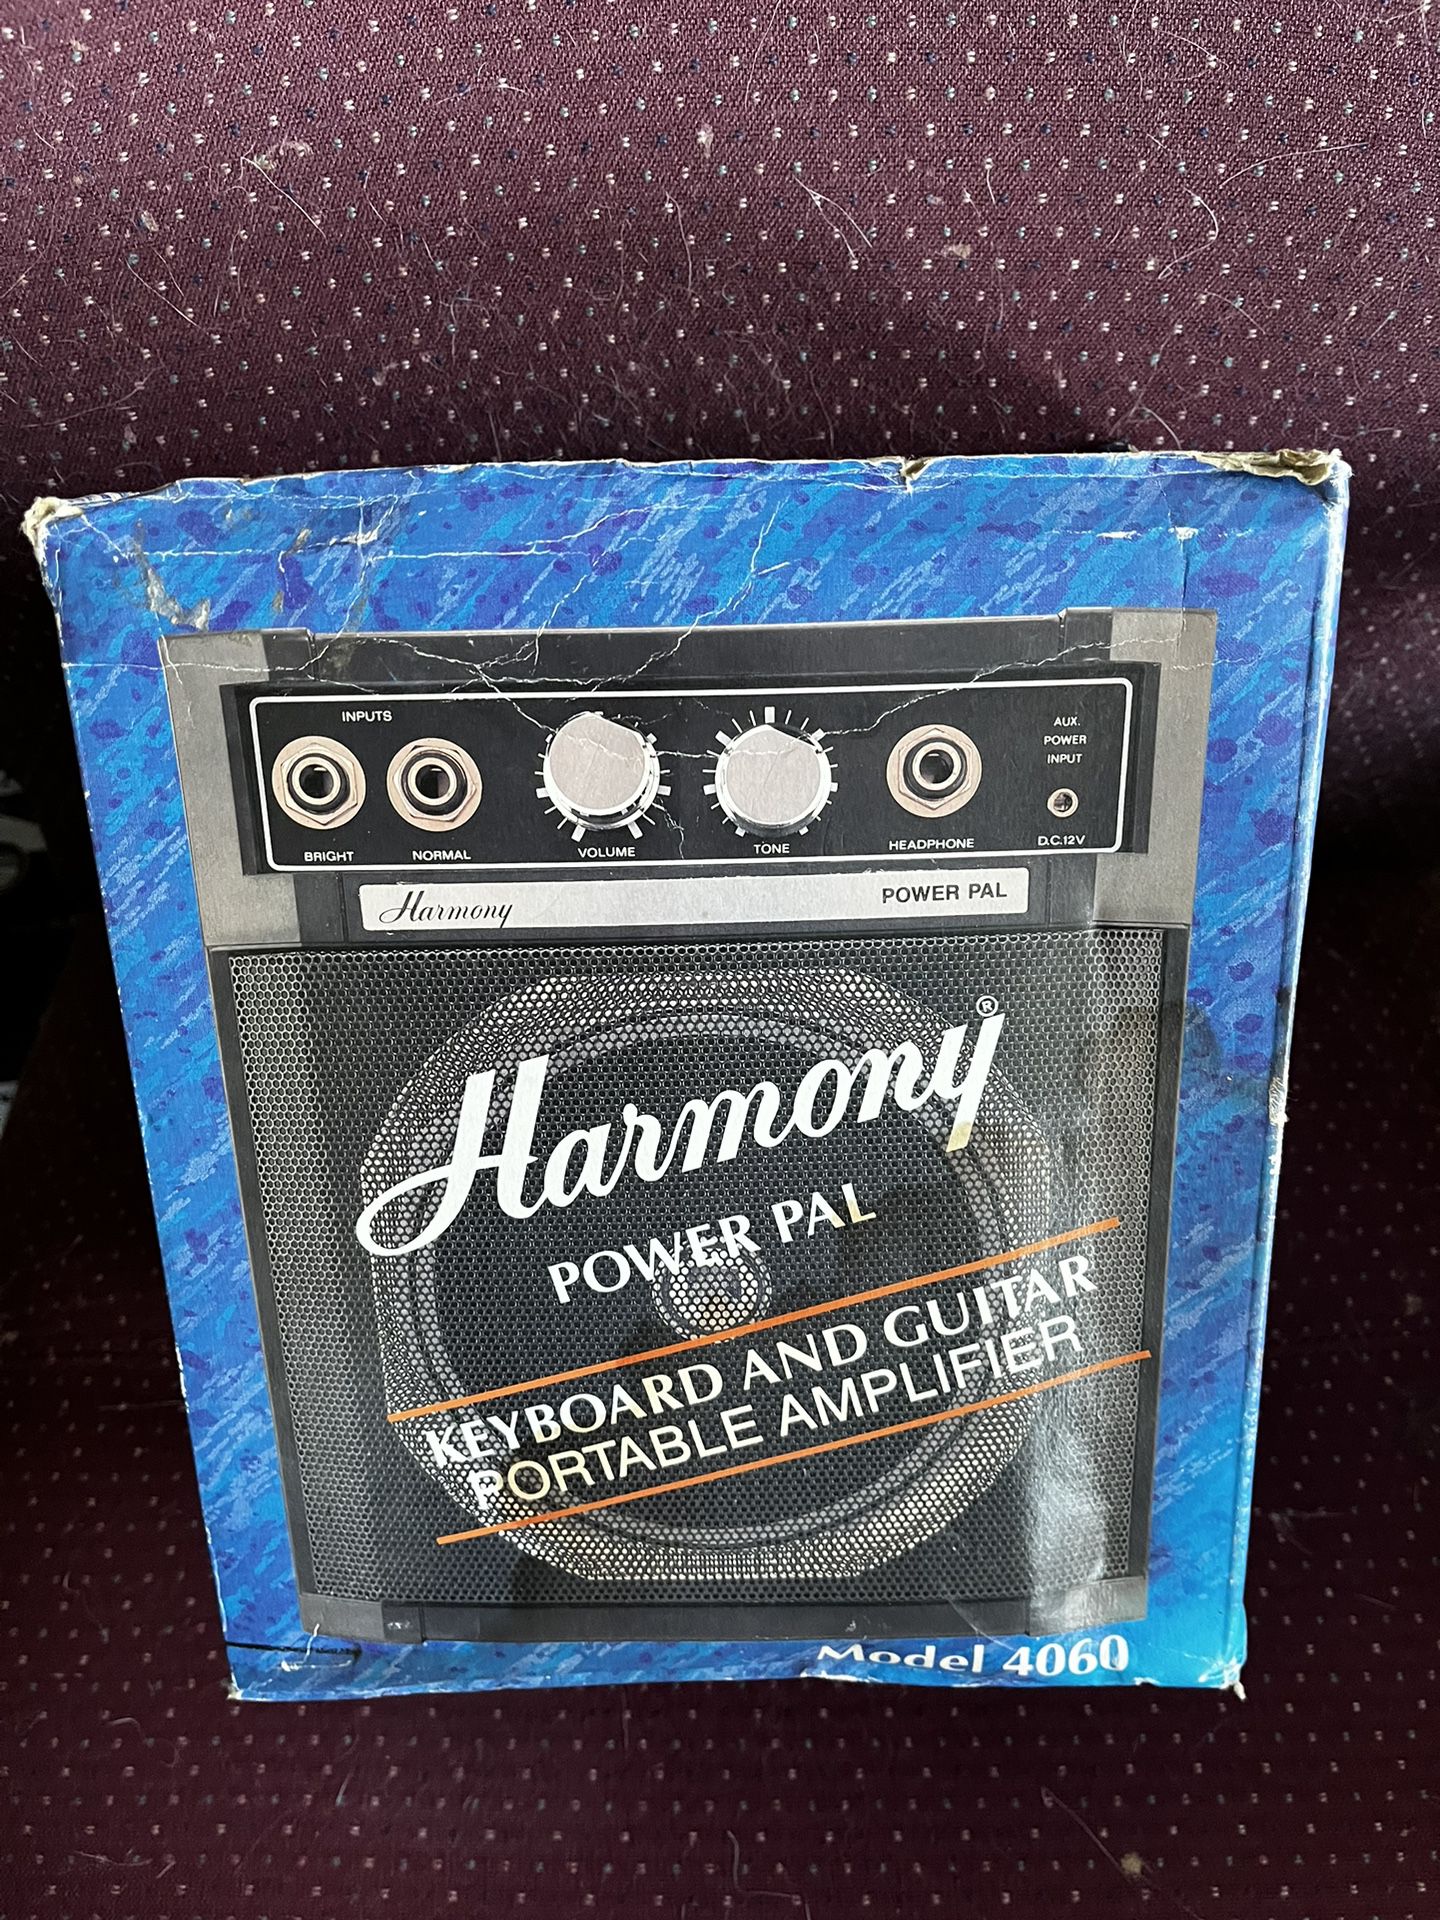 Harmony, Portable Amp Used With Microphone For Pa Keyboard And Guitars